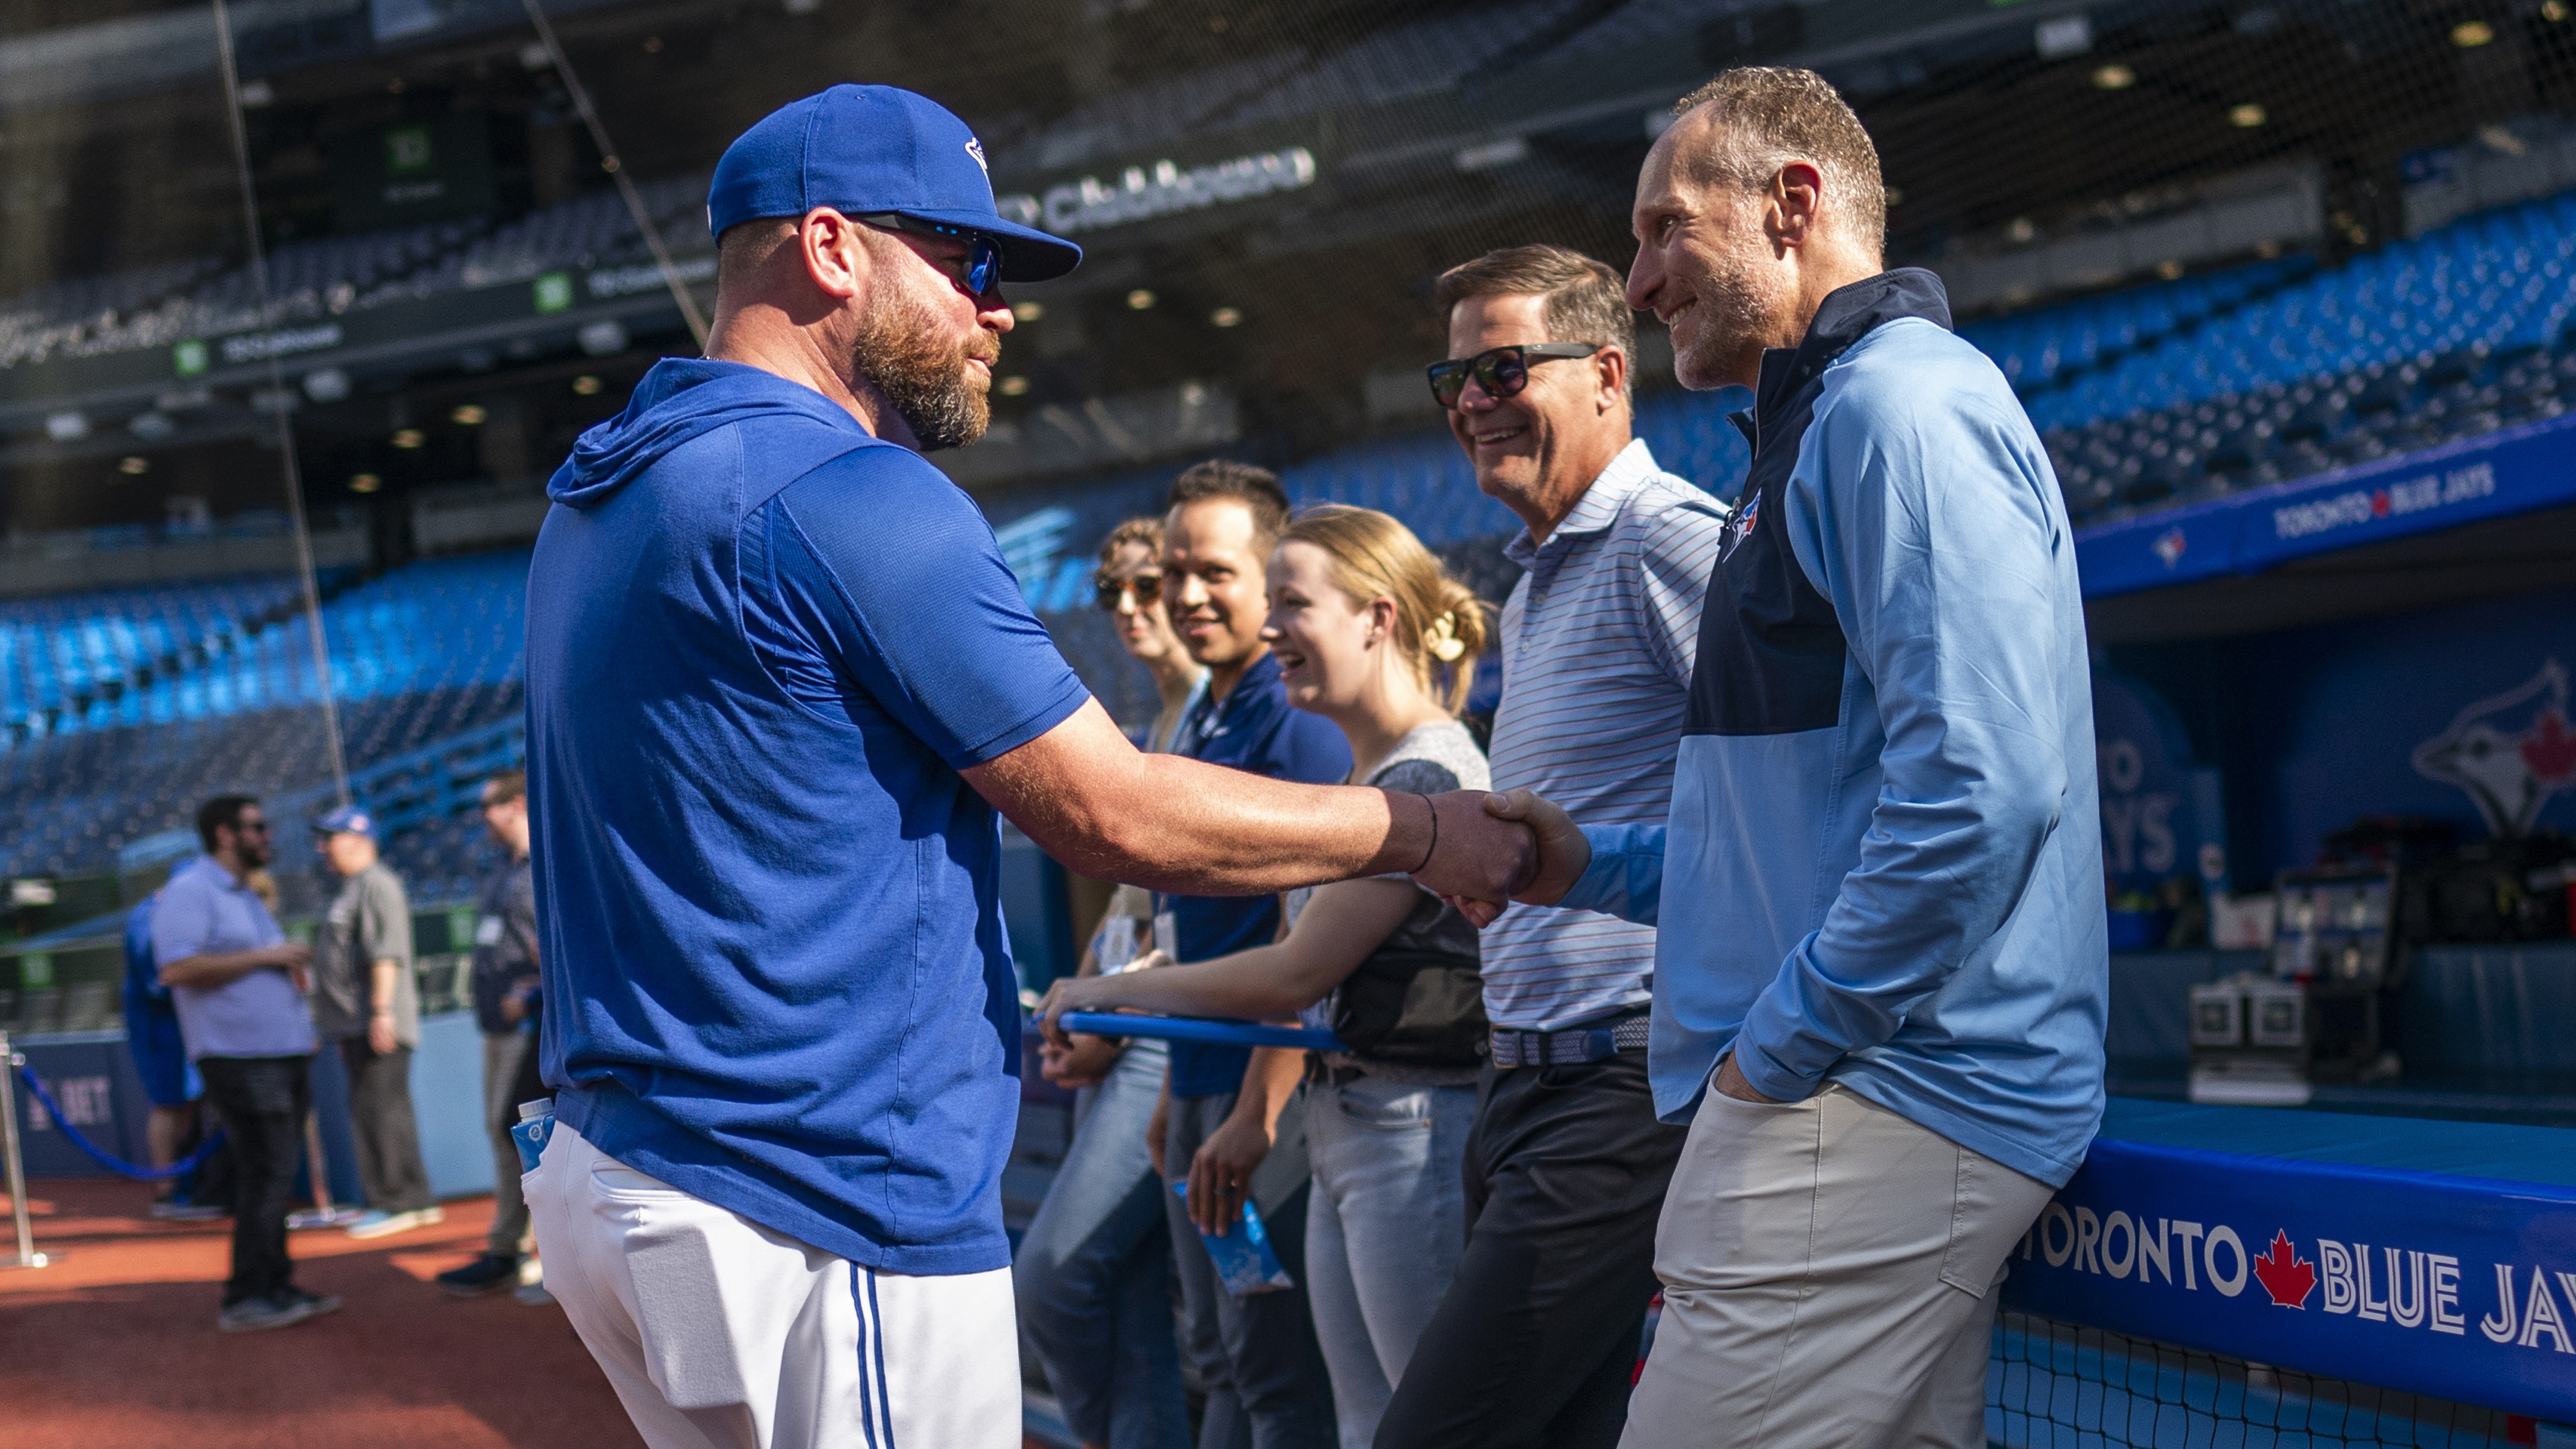 Blue Jays reinforcing excitement despite what's going wrong